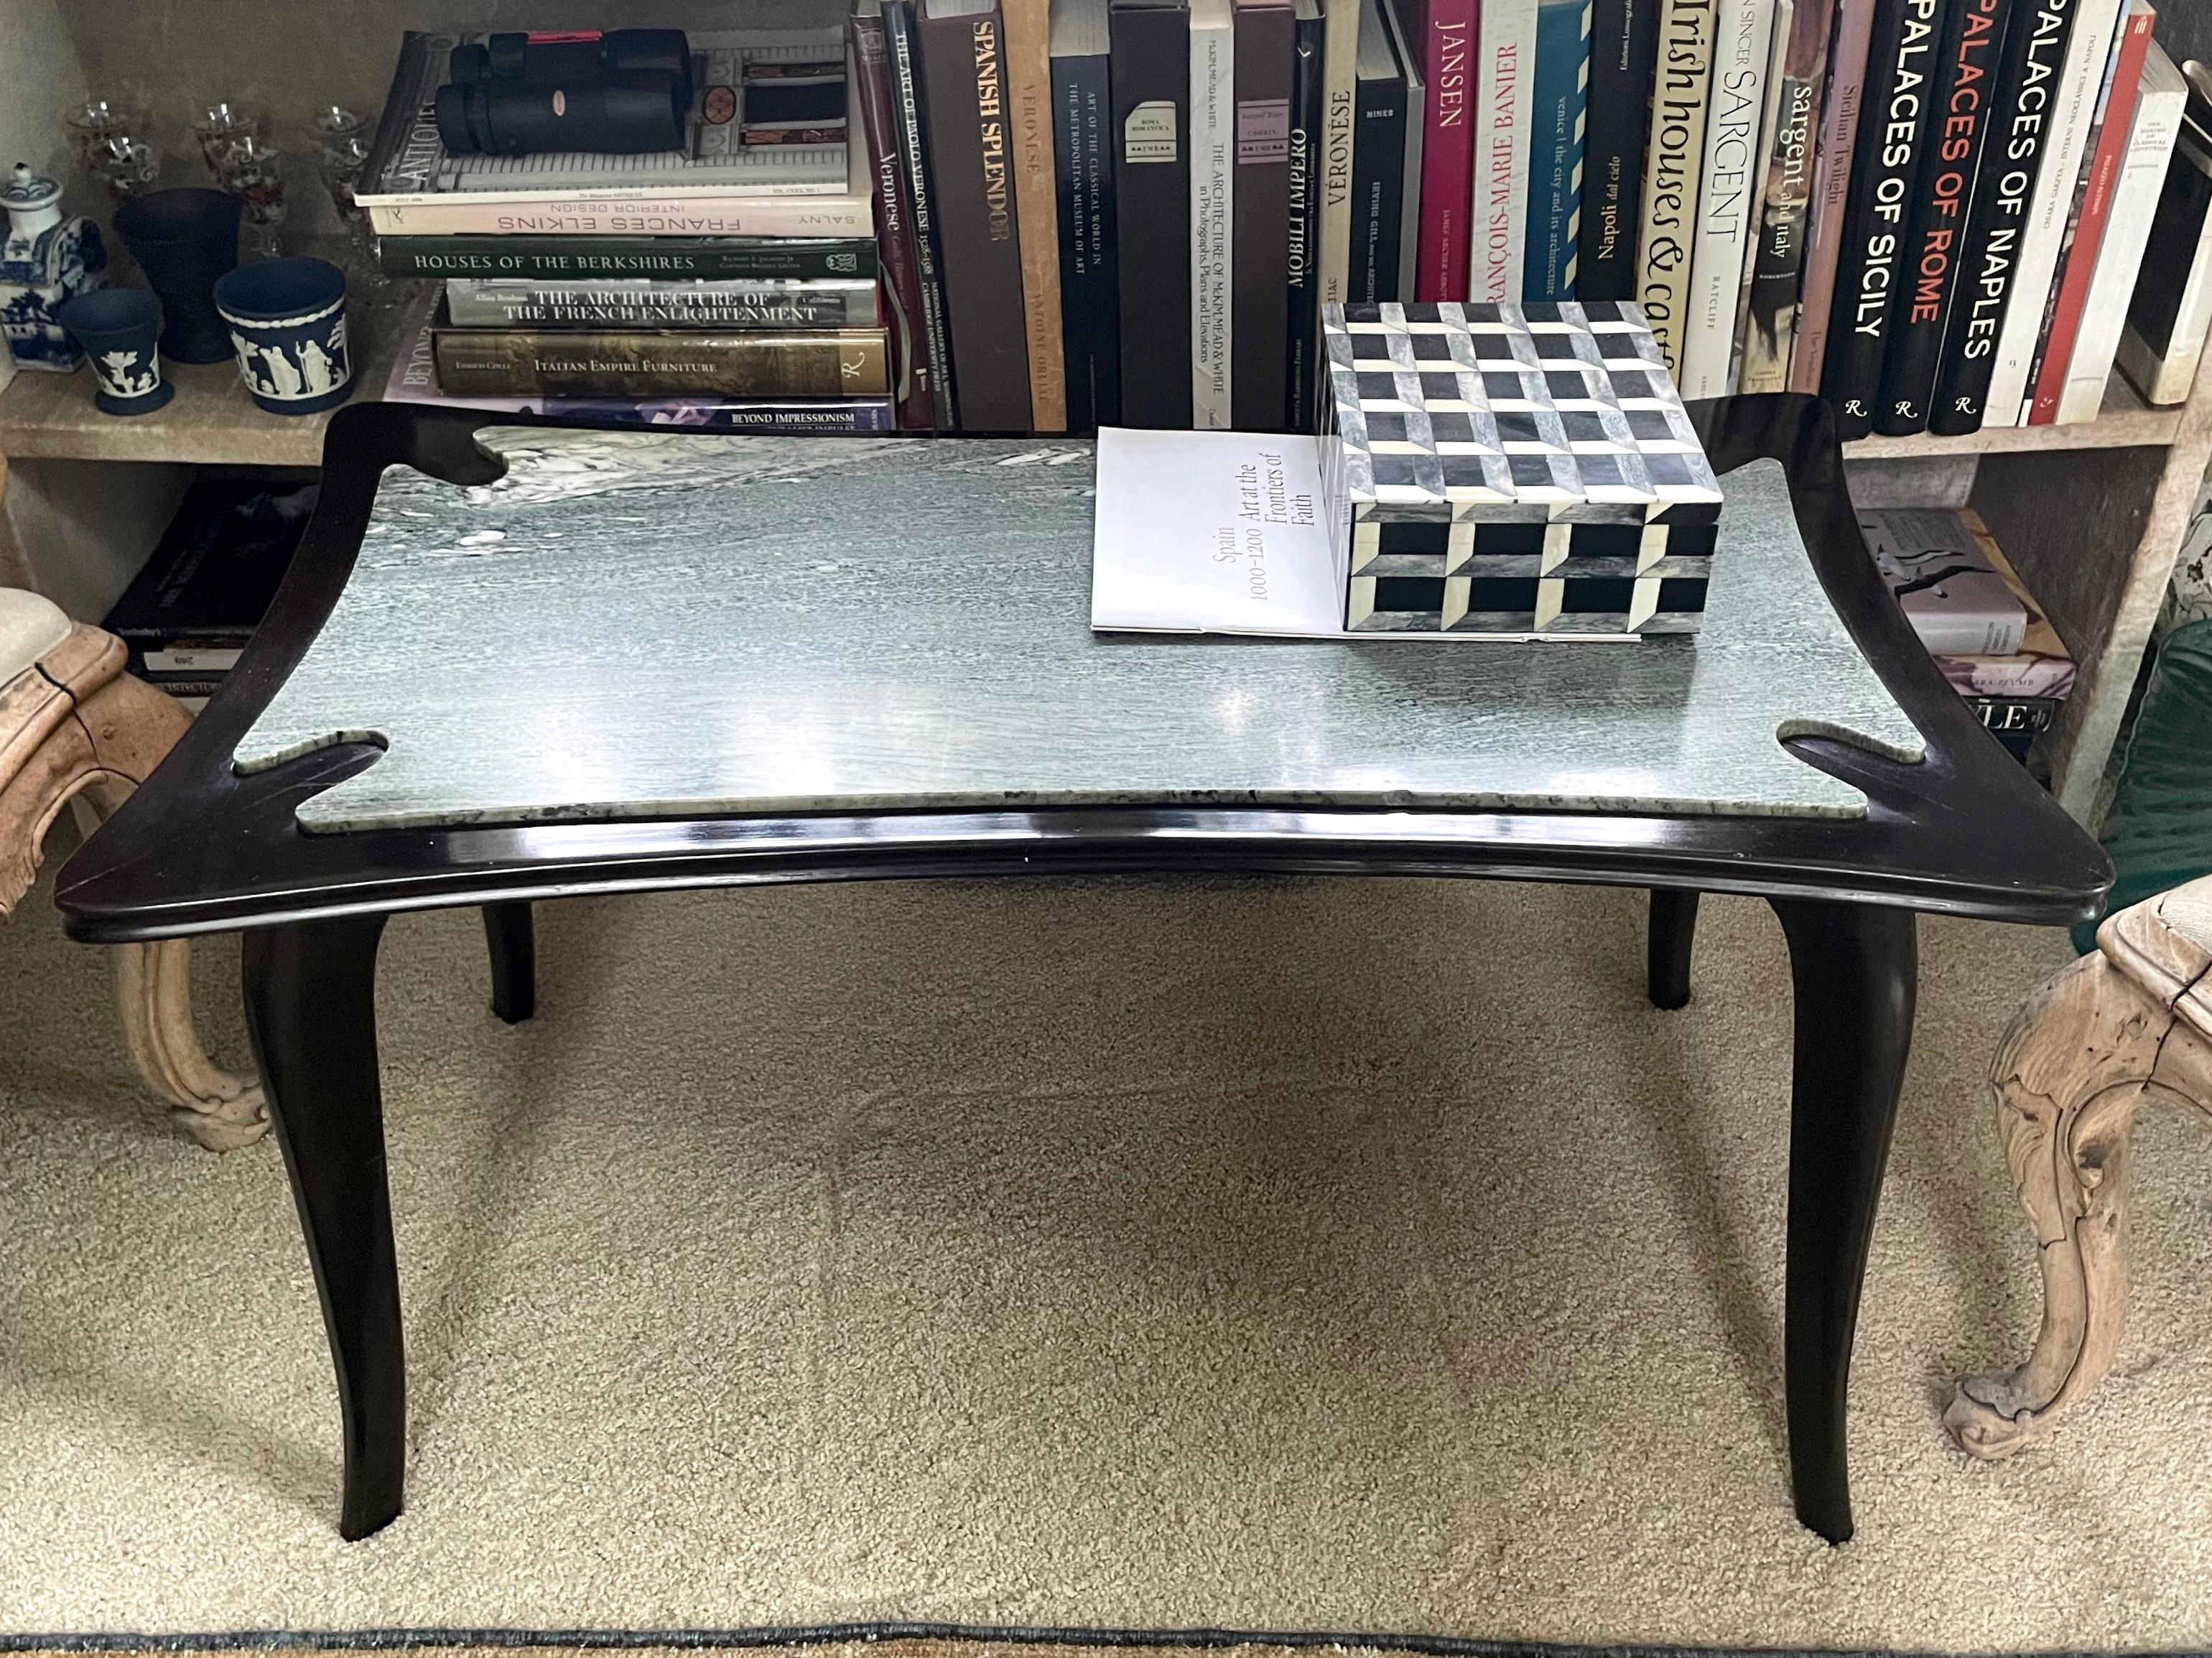 Italian mid-century marble top coffee table.  Vintage Italian moderne table with carved inset grey green and white marble top. Italy, circa 1940s.
Dimensions: 36